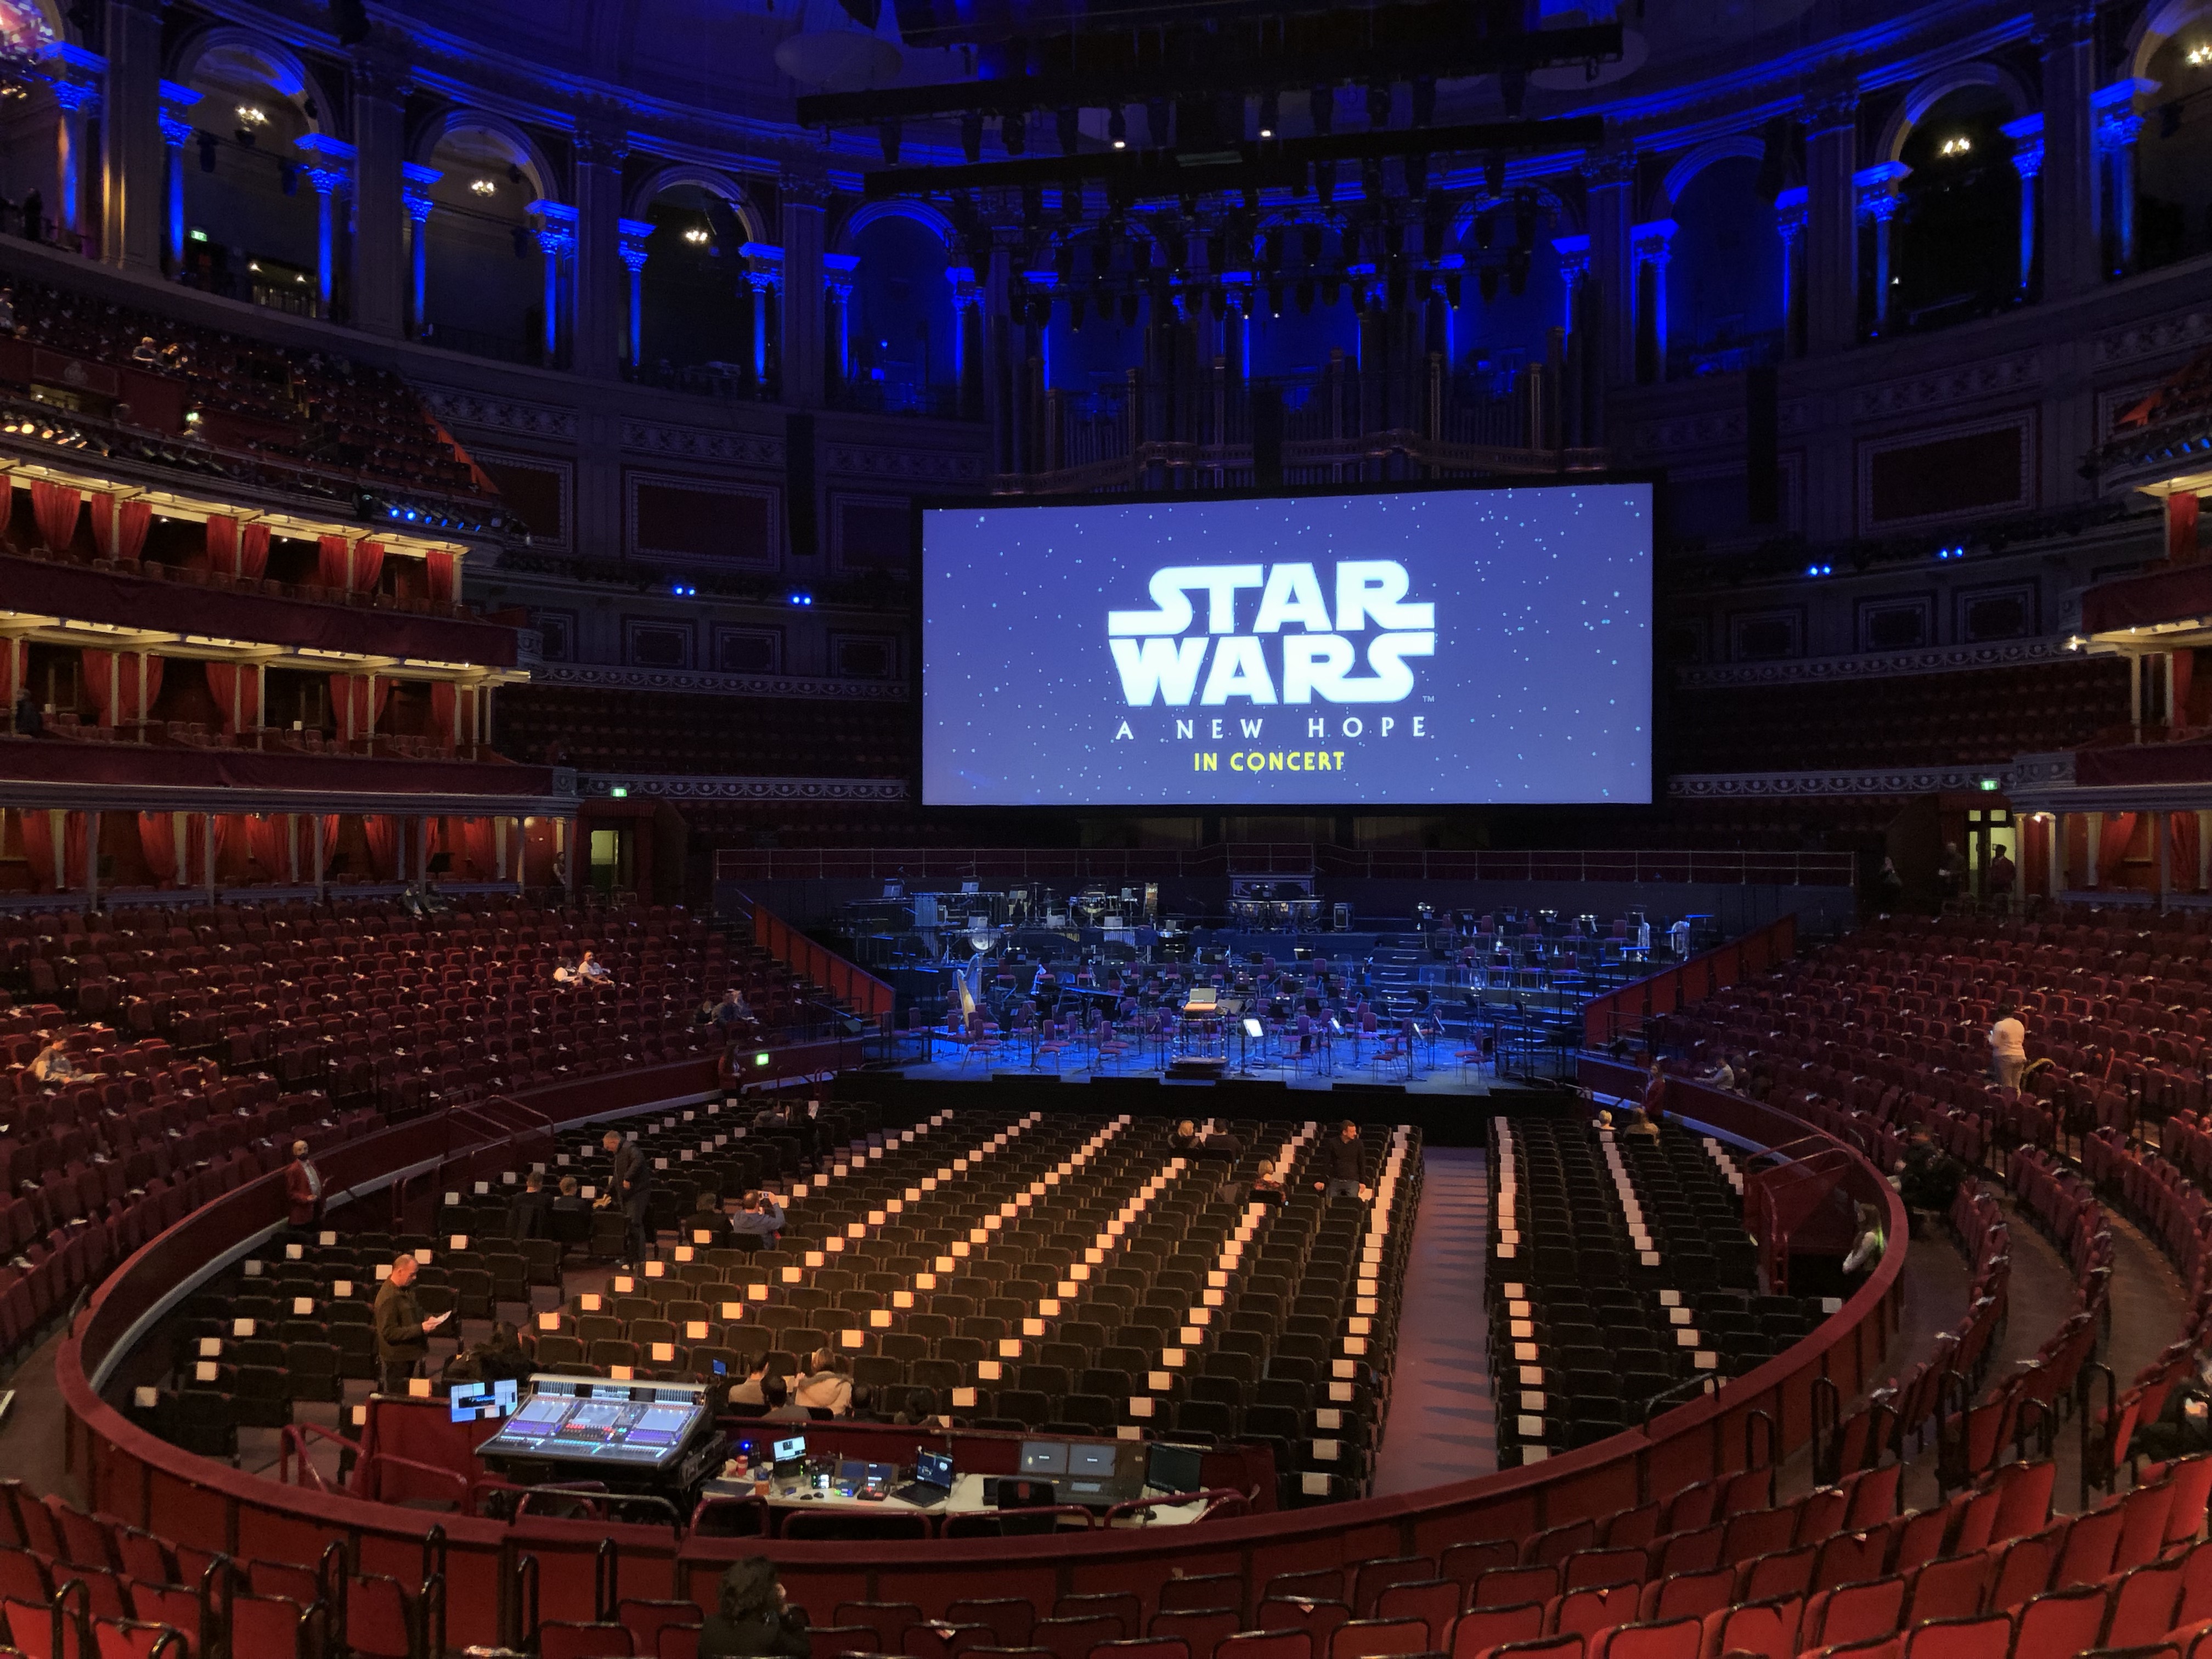 star-wars-a-new-hope-in-concert